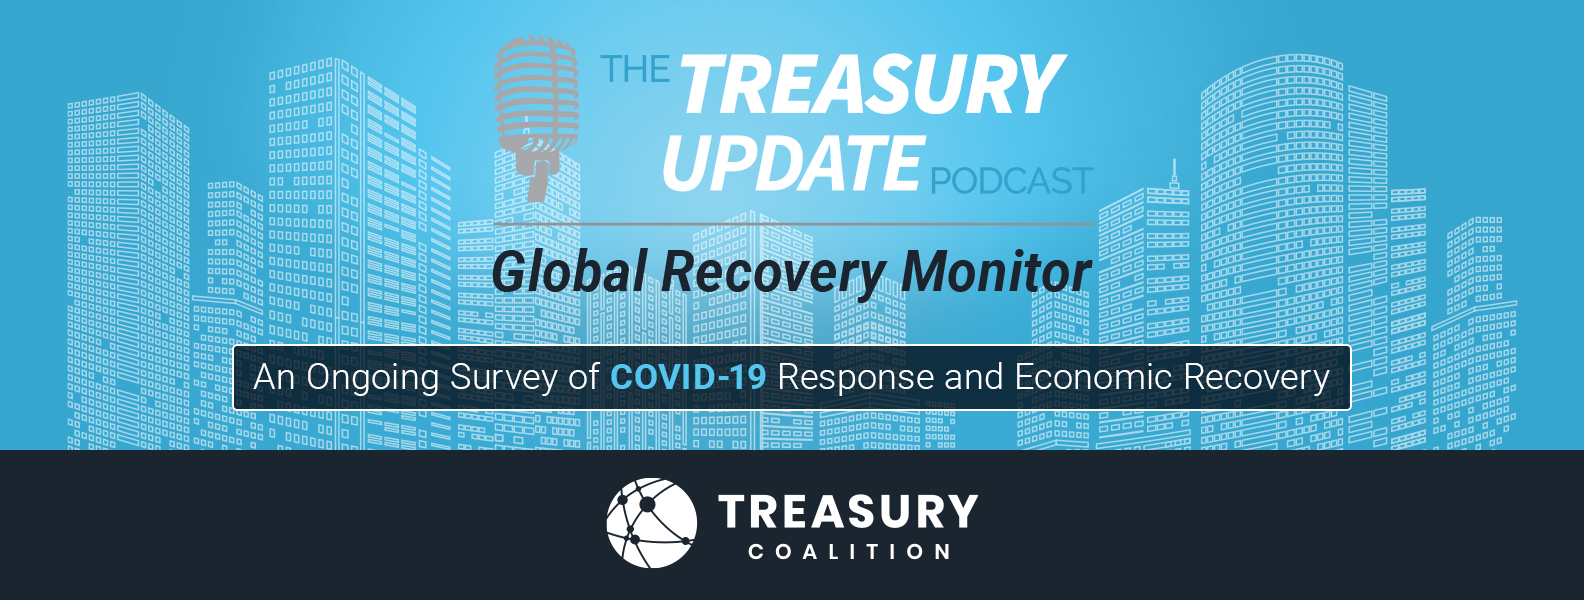 Global Recovery Monitor Podcast Series